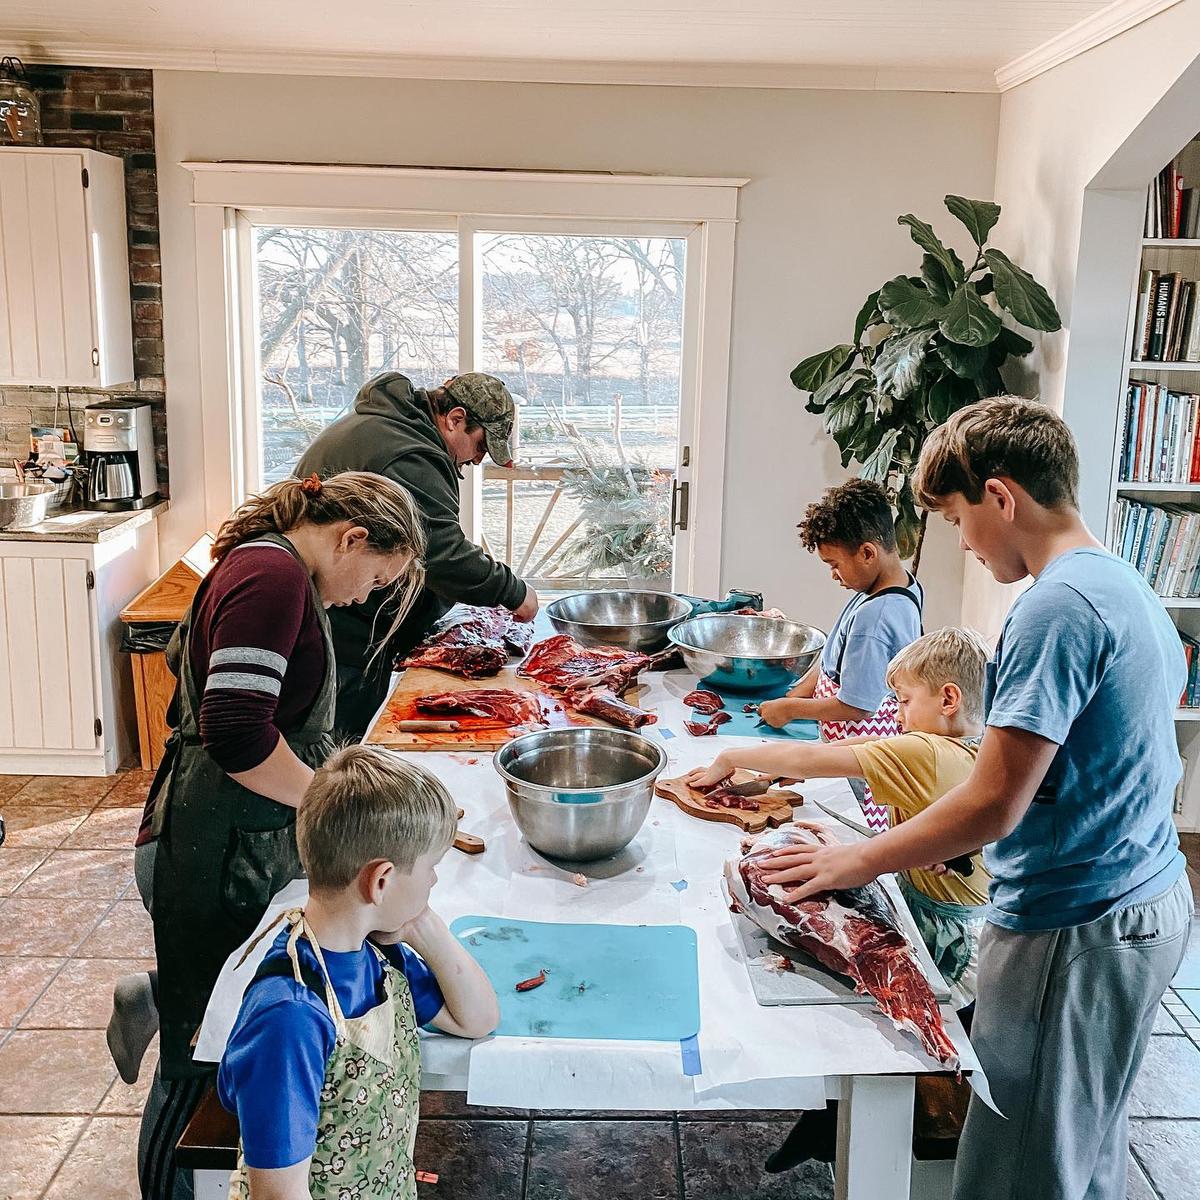 (Courtesy of <a href="https://www.youtube.com/channel/UCvoLCarfMRzuq-dLXeuohuw">Homesteading with the Zimmermans</a> and <a href="https://www.instagram.com/ruthannzimm/">@ruthannzimm</a>)